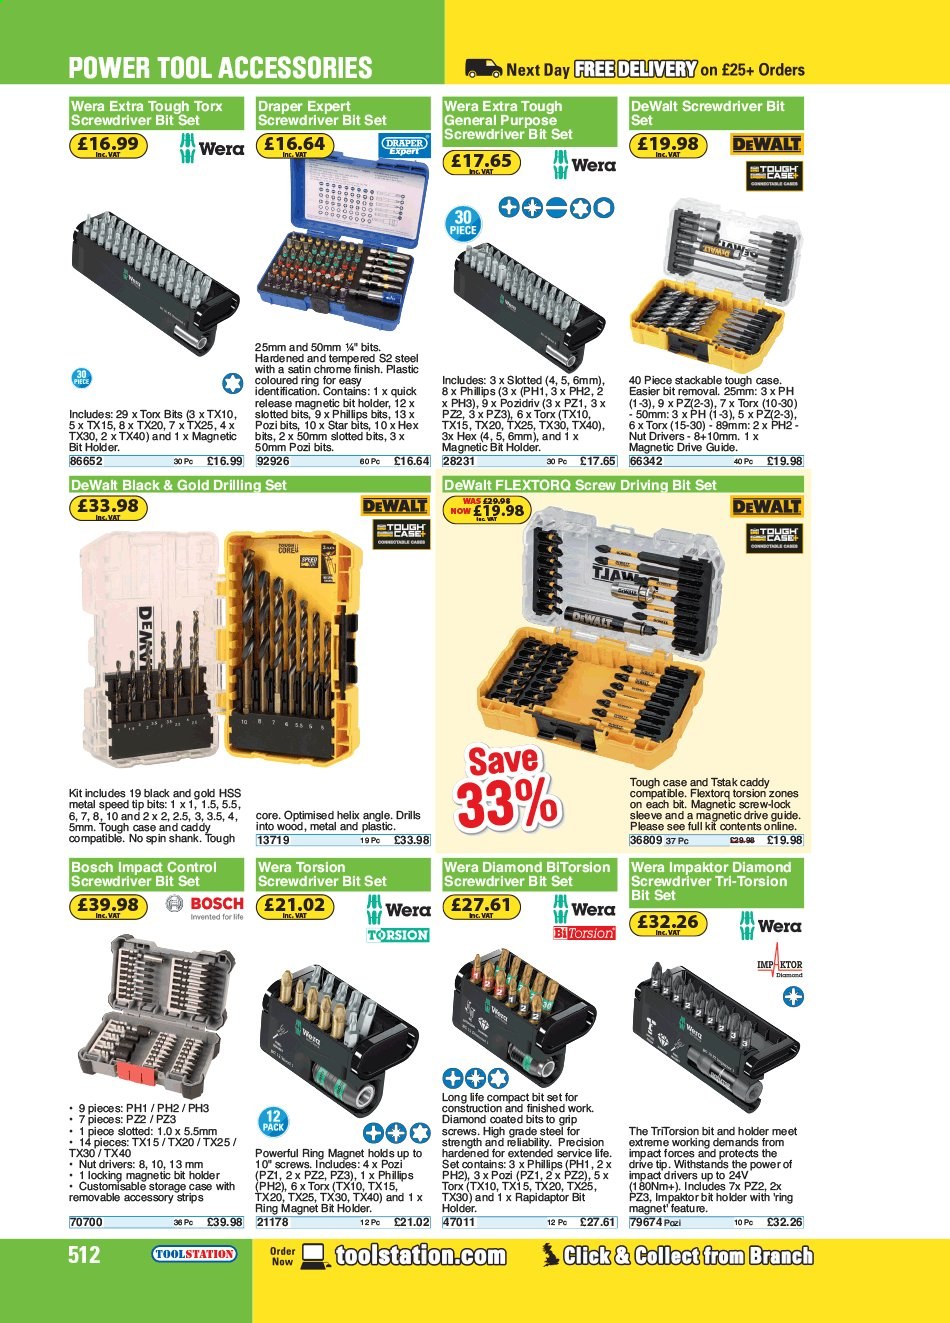 Toolstation offer . Page 512.